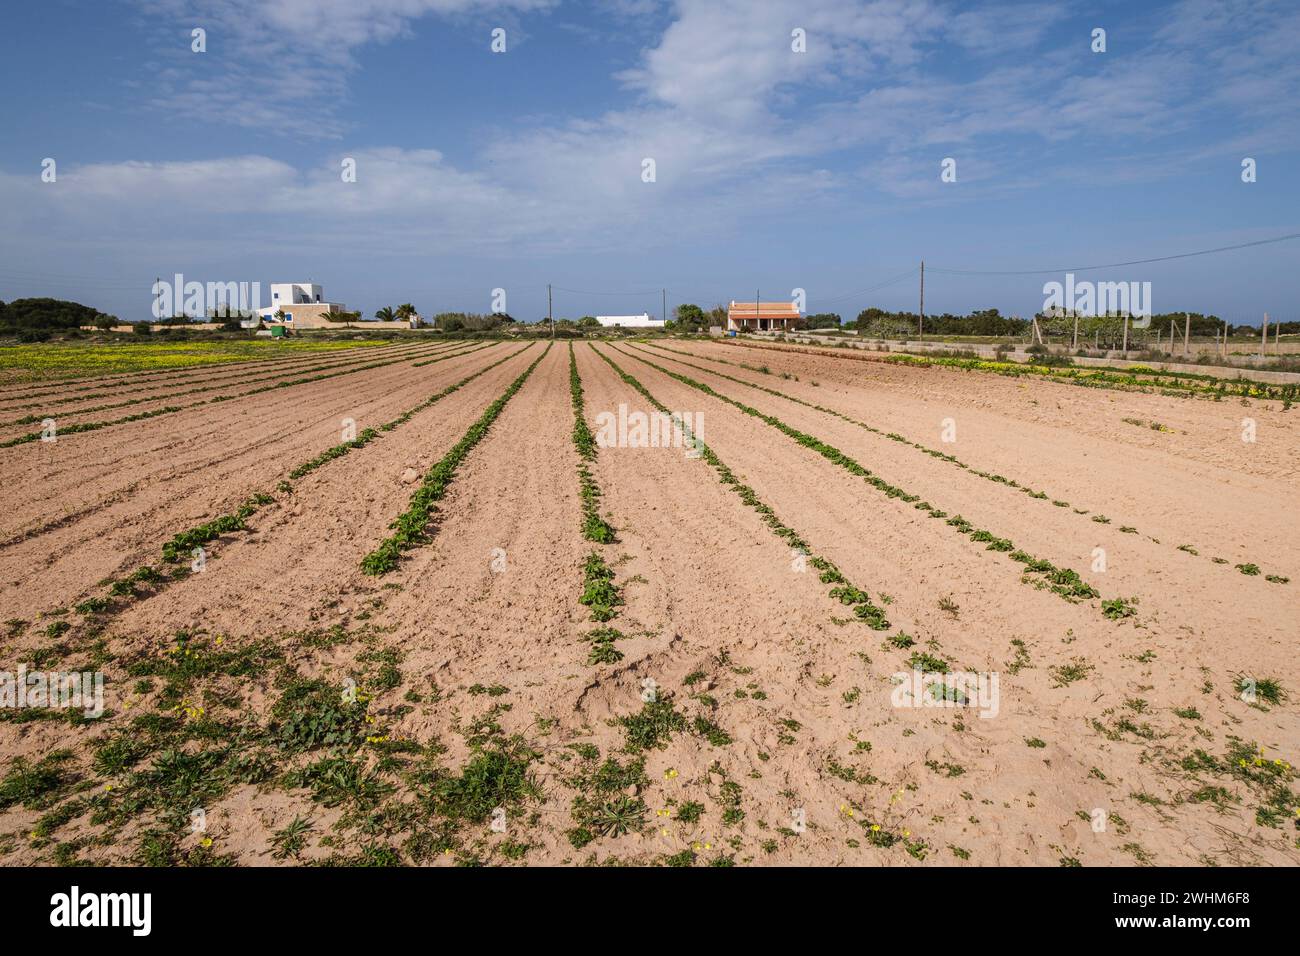 Vegetable patch Stock Photo